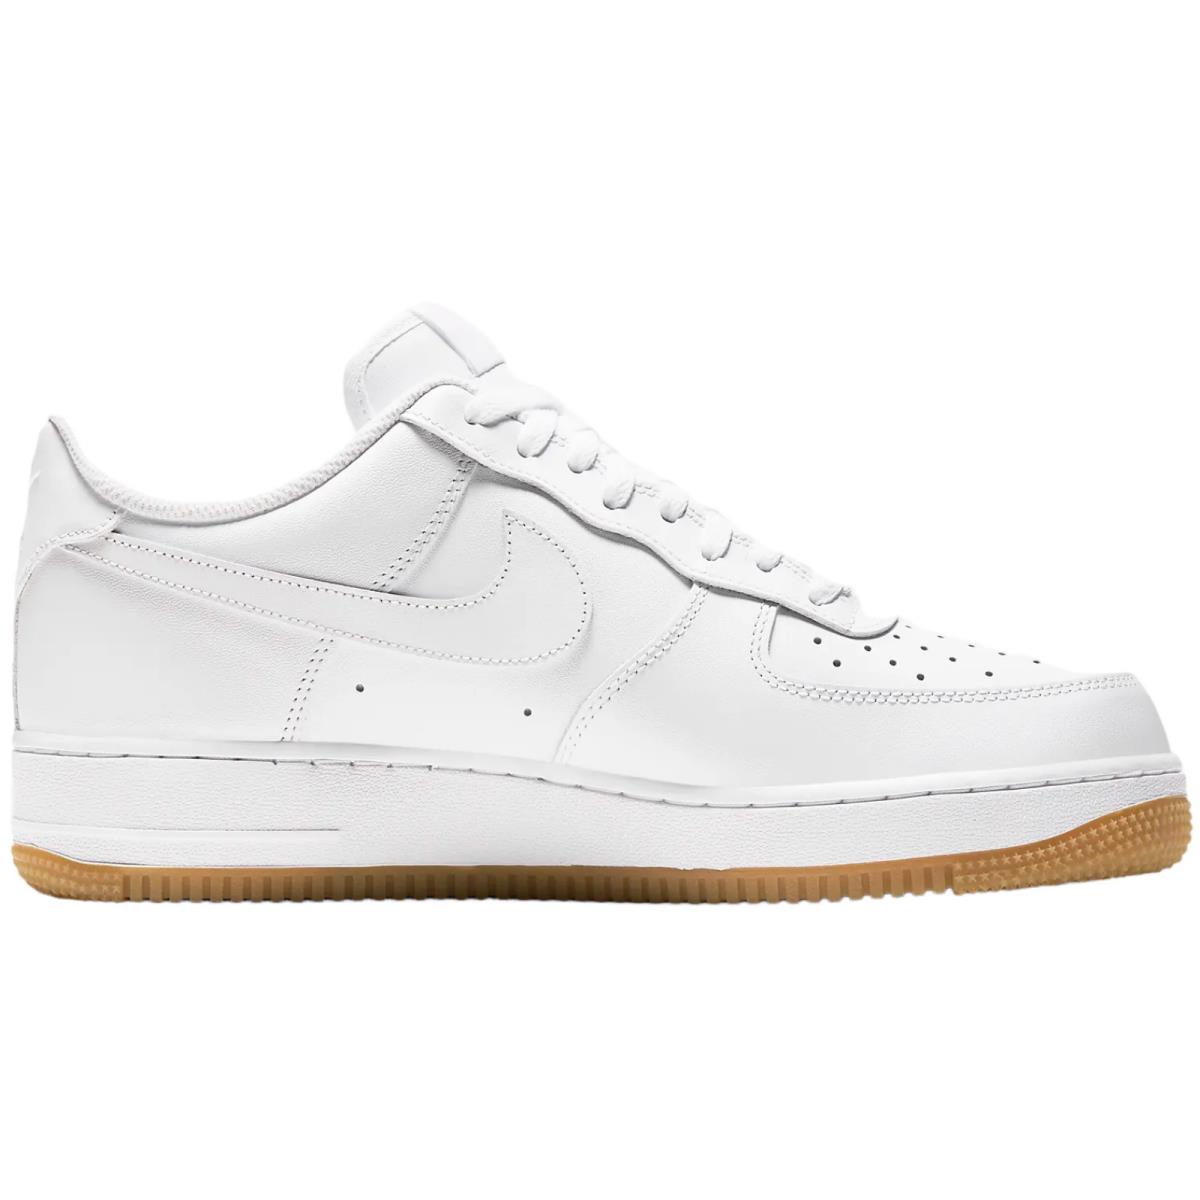 Nike Air Force 1 `07 Men`s Casual Shoes All Colors US Sizes 7-14 White/Gum Light Brown/White